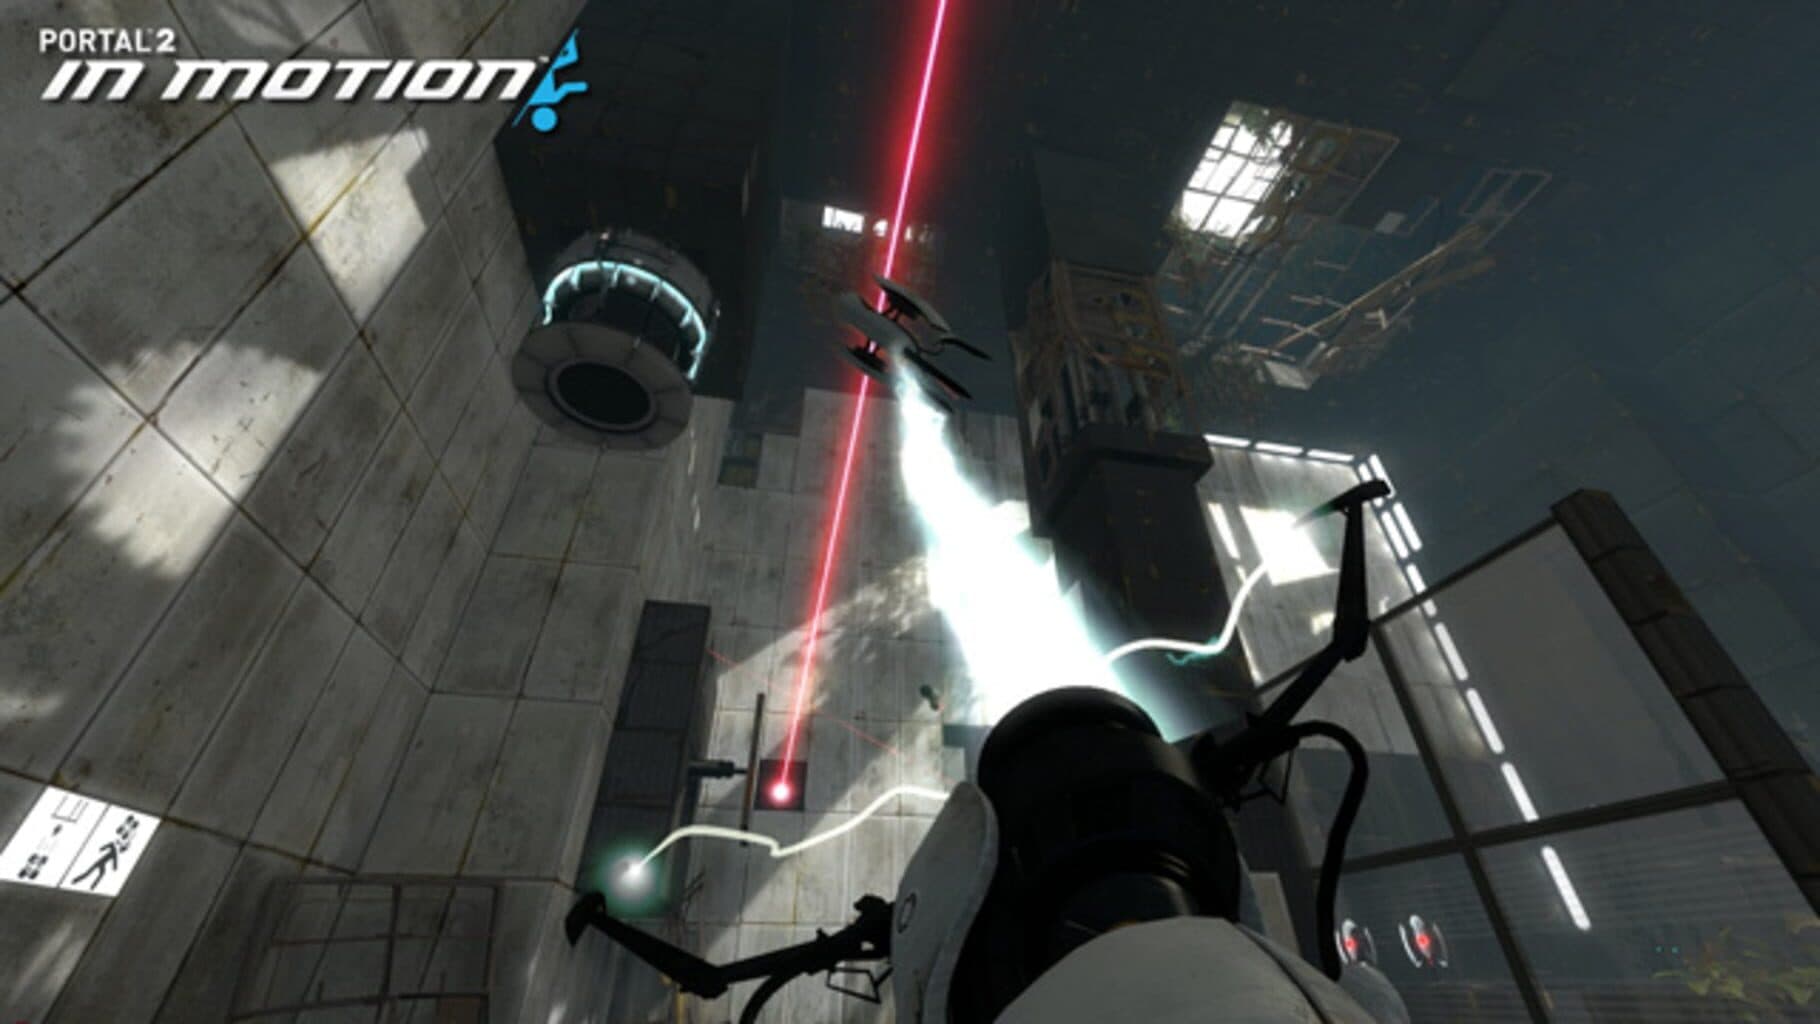 Portal 2: In Motion Image